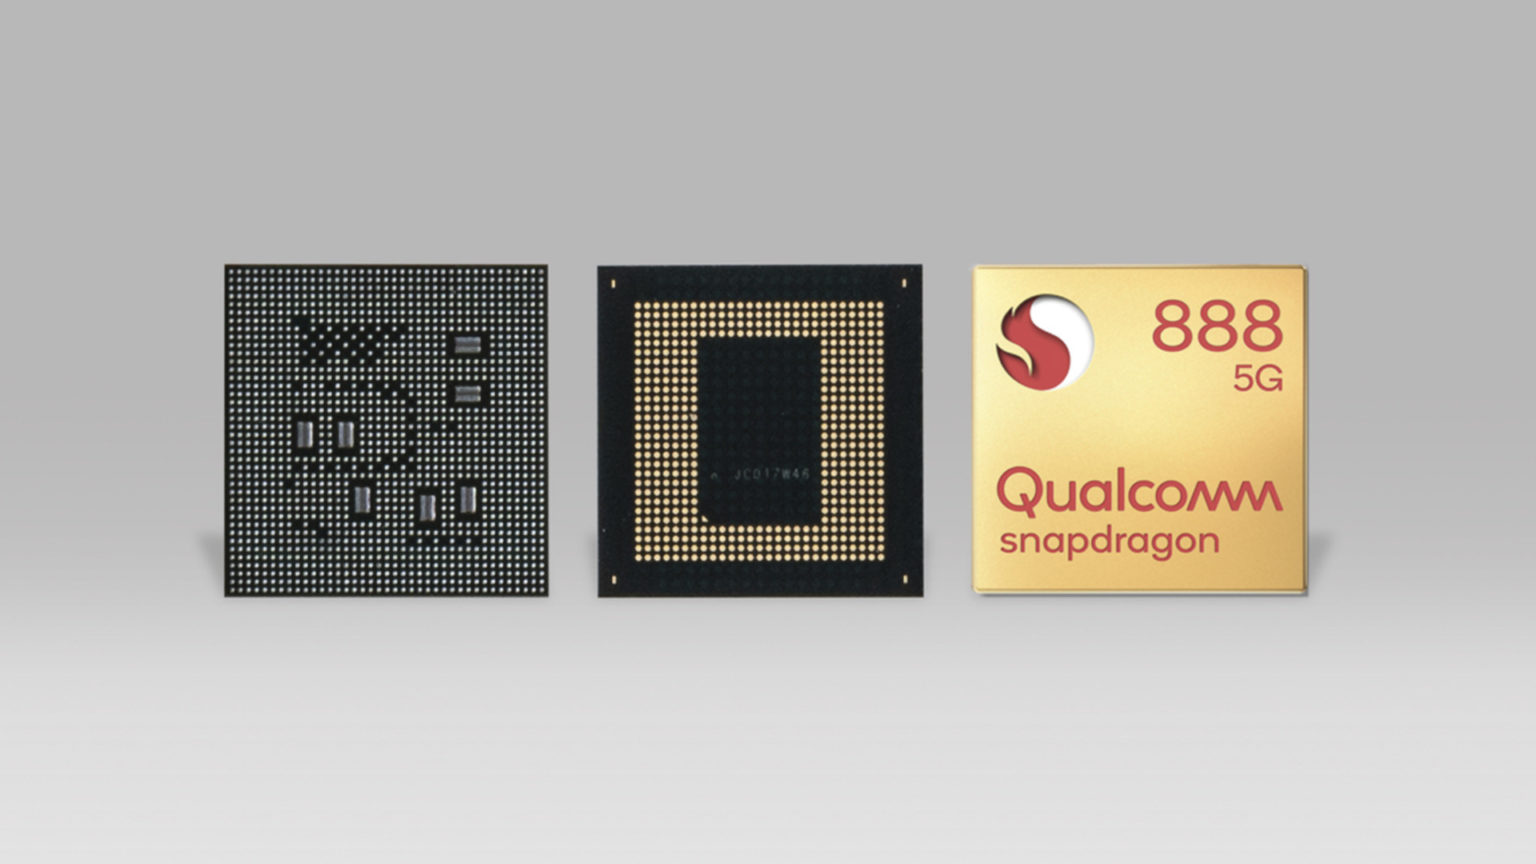 Qualcomm Snapdragon 888 5G(SM8350) Specification